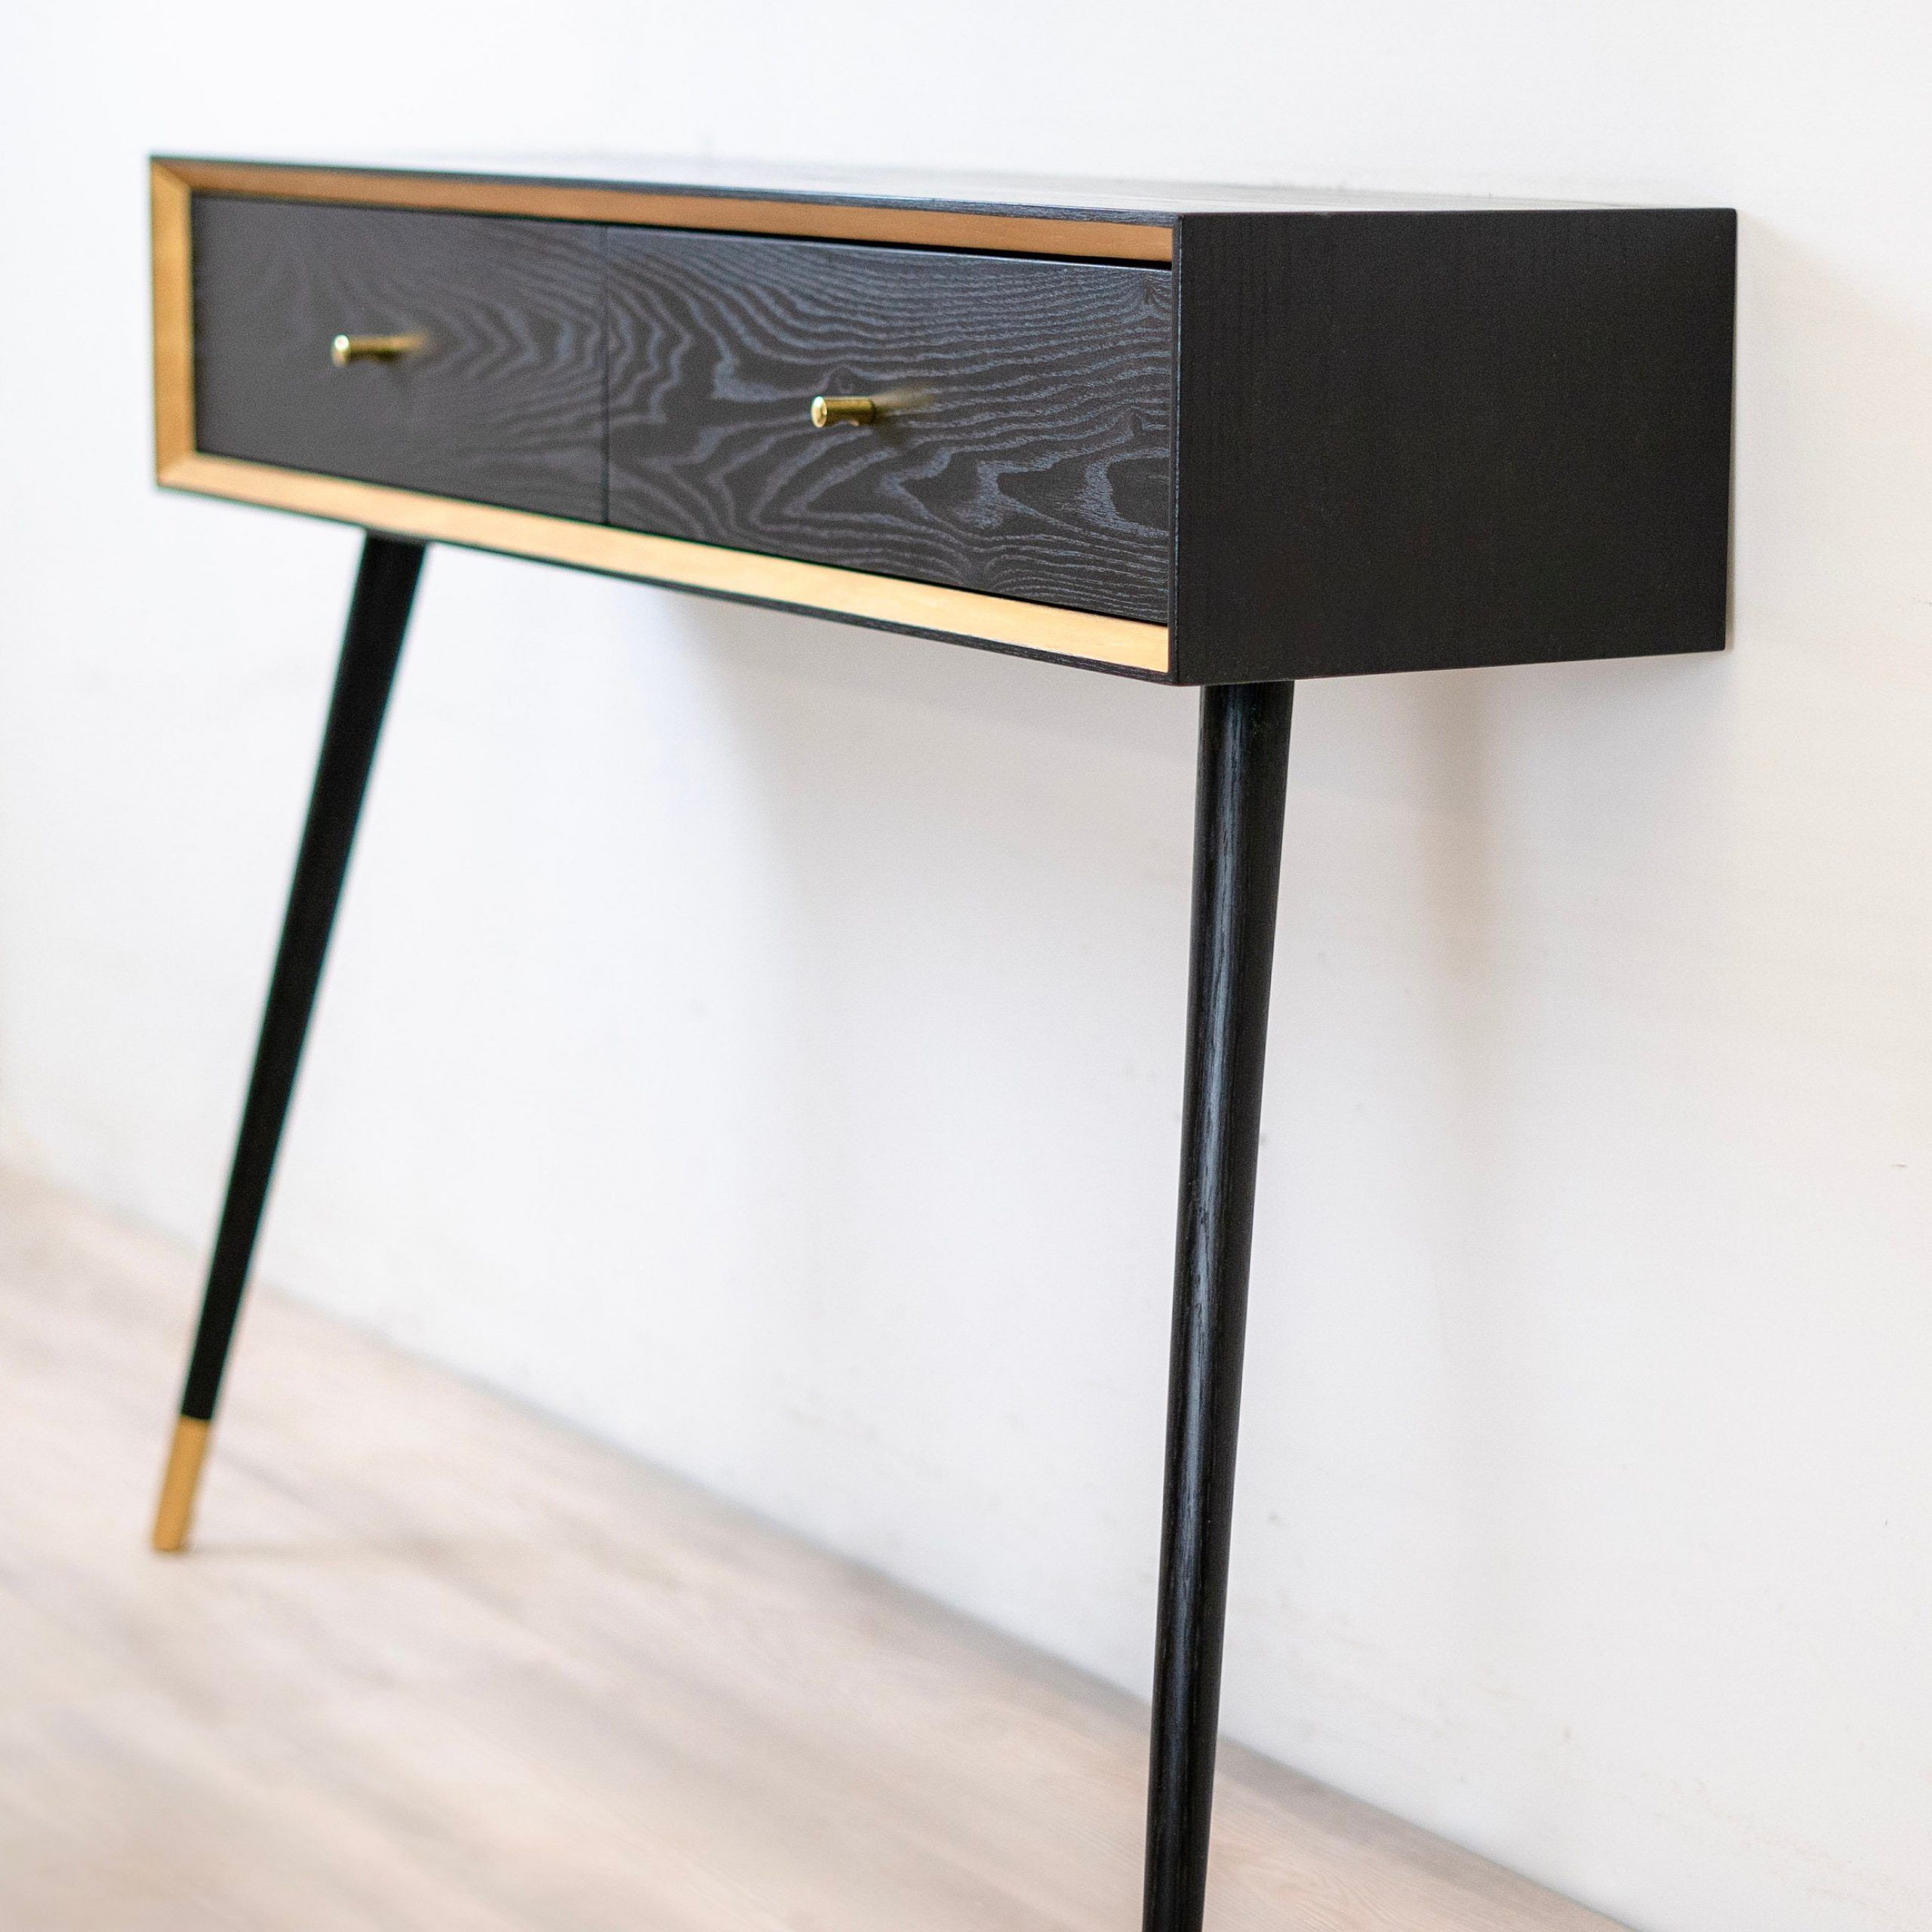 Solid Wood Console Table, Entryway Mcm Black And Gold Console, Black Pertaining To Black And Gold Console Tables (View 3 of 20)